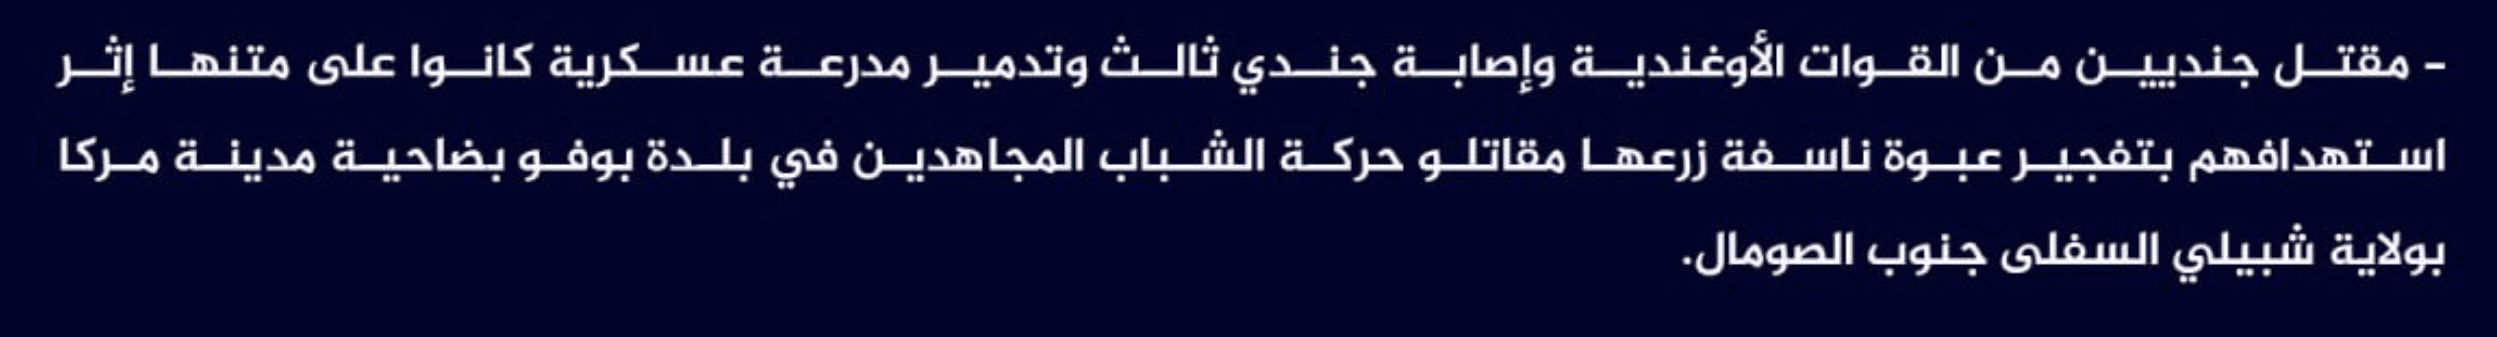 (Claim) al-Shabaab Killed Two Ugandan Soldiers, Injured a Third and Destroyed a Military Vehicle in an IED Attack in Bofo Town, Marka City, Lower Shabelle State, Somalia - 11 February 2023